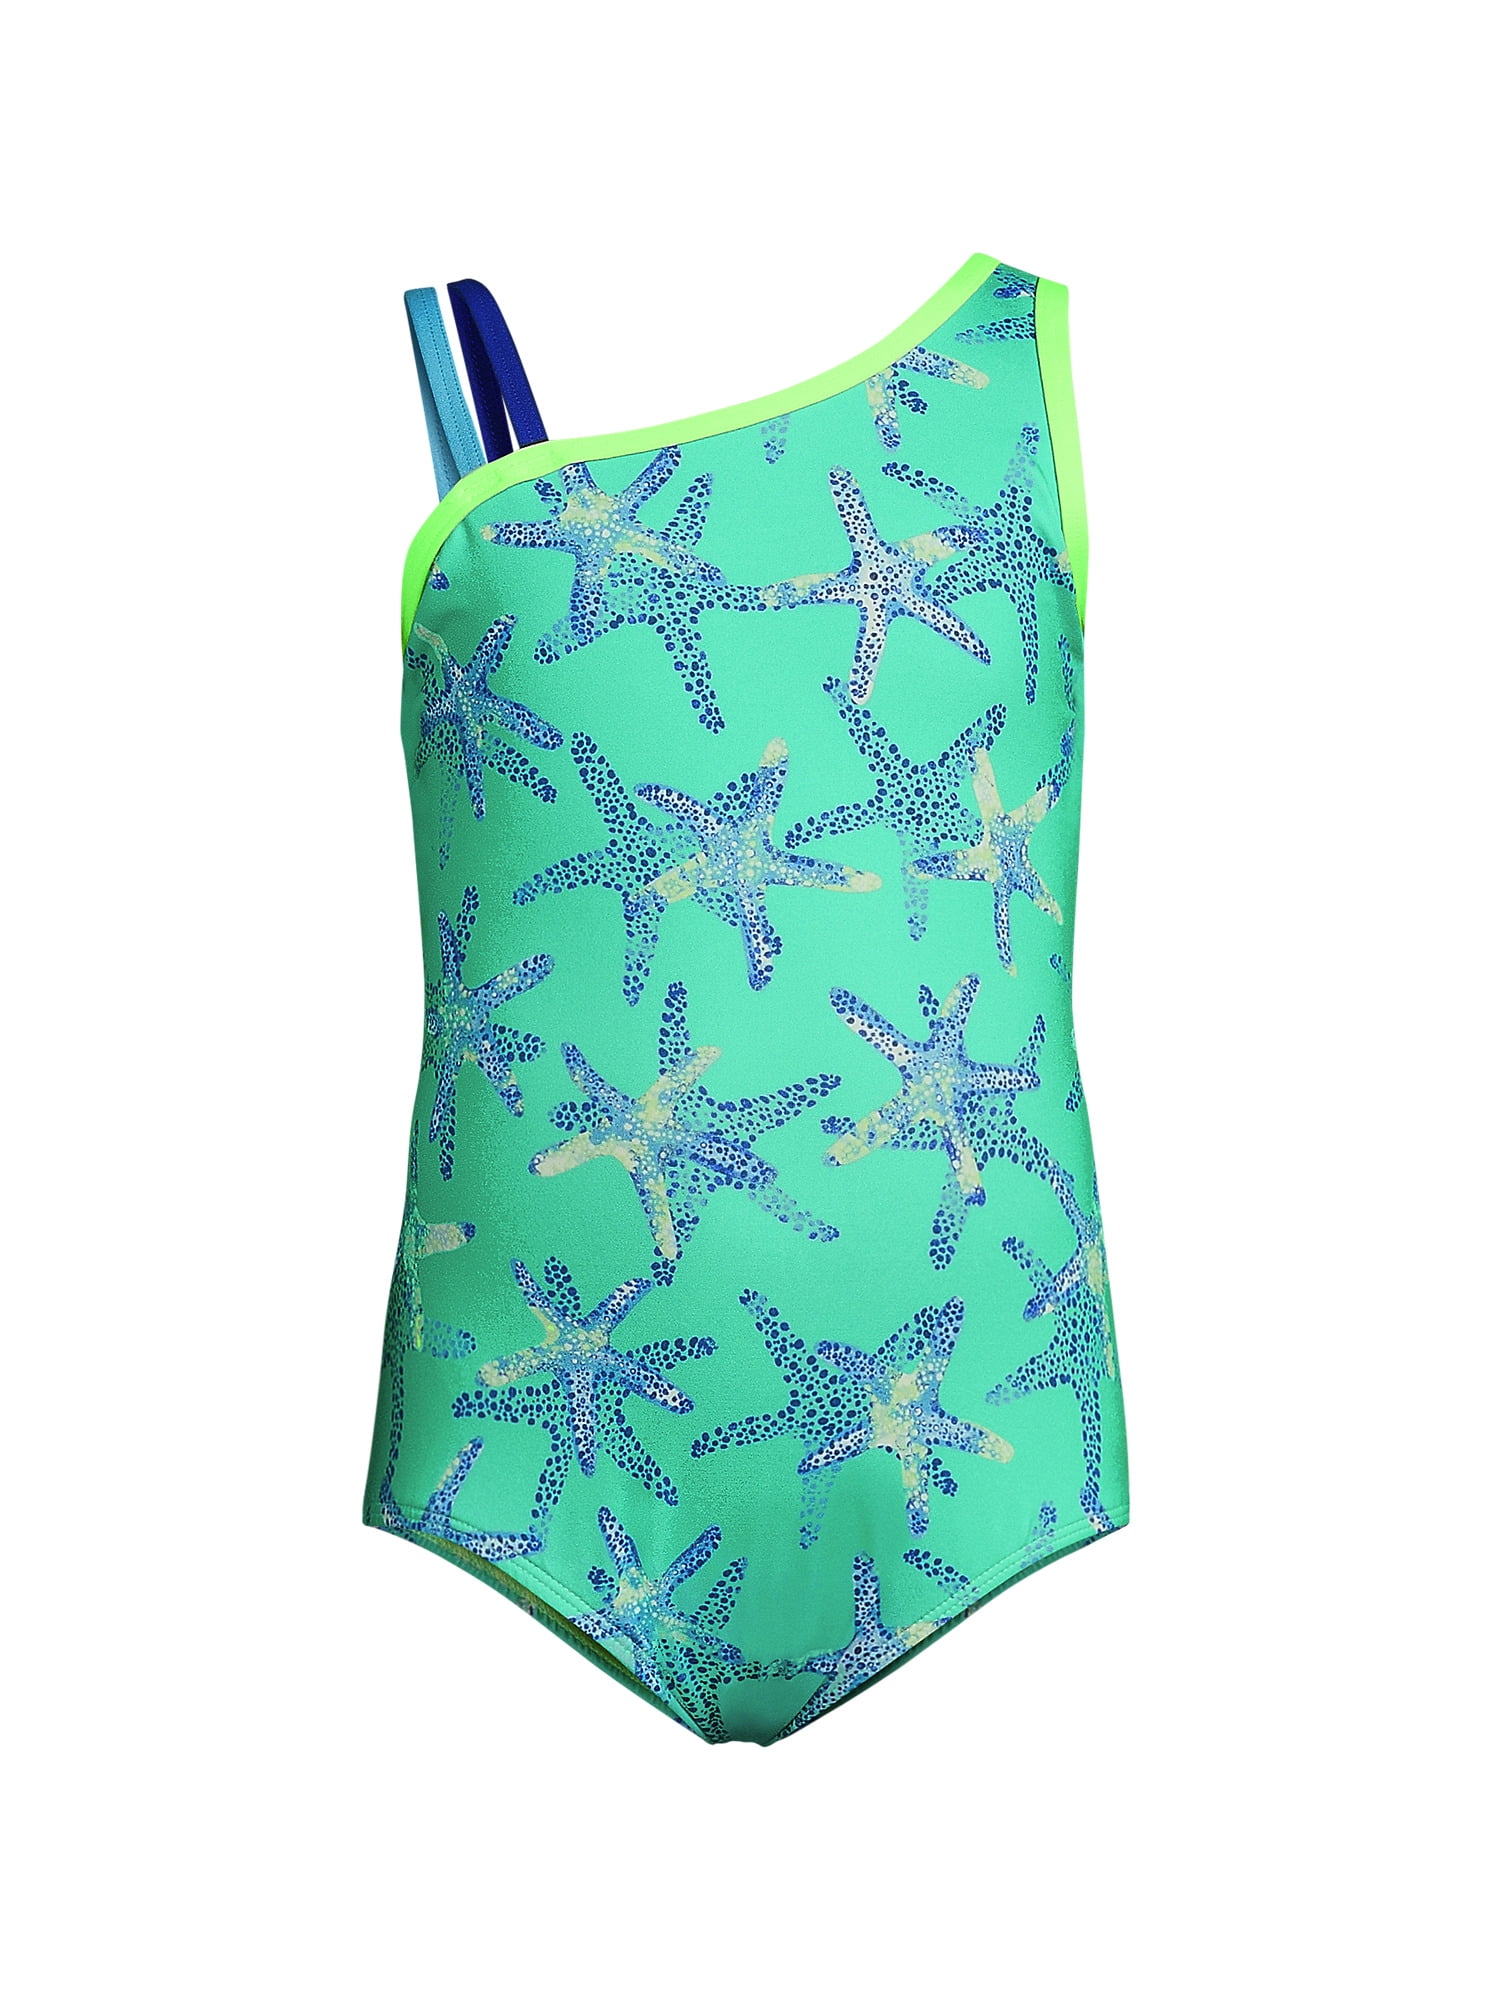 Lands' End Womens Chlorine Resistant One Shoulder Cut Out One Piece Swimsuit  Control Electric Blue/Violet Rose Regular 16 at  Women's Clothing  store